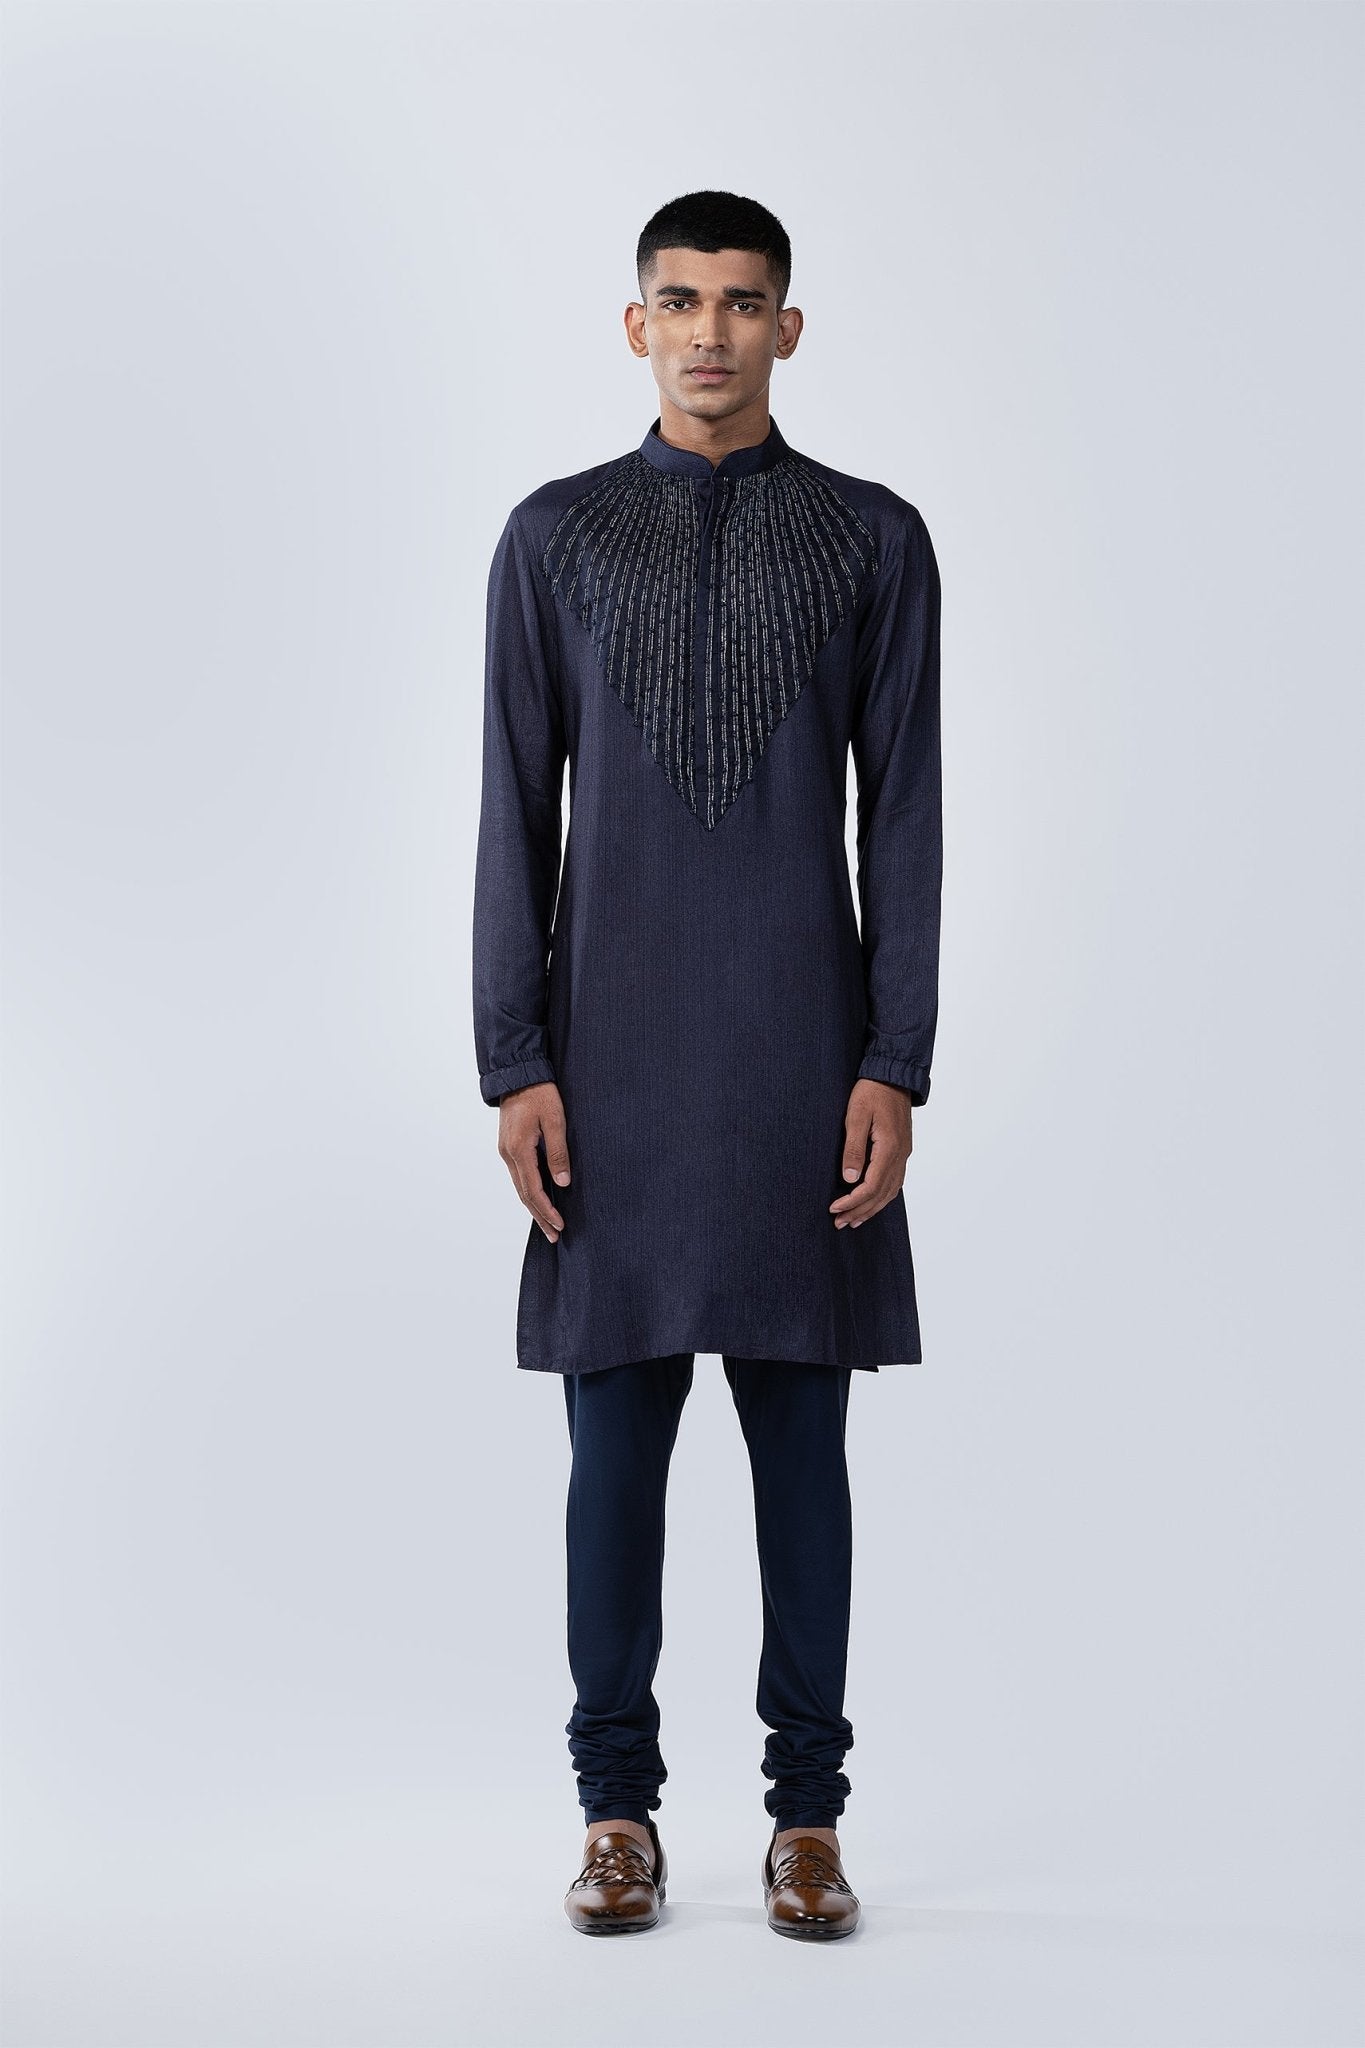 NAVY BLUE EMBROIDERED KURTA - Kilachand Retail Private Limited